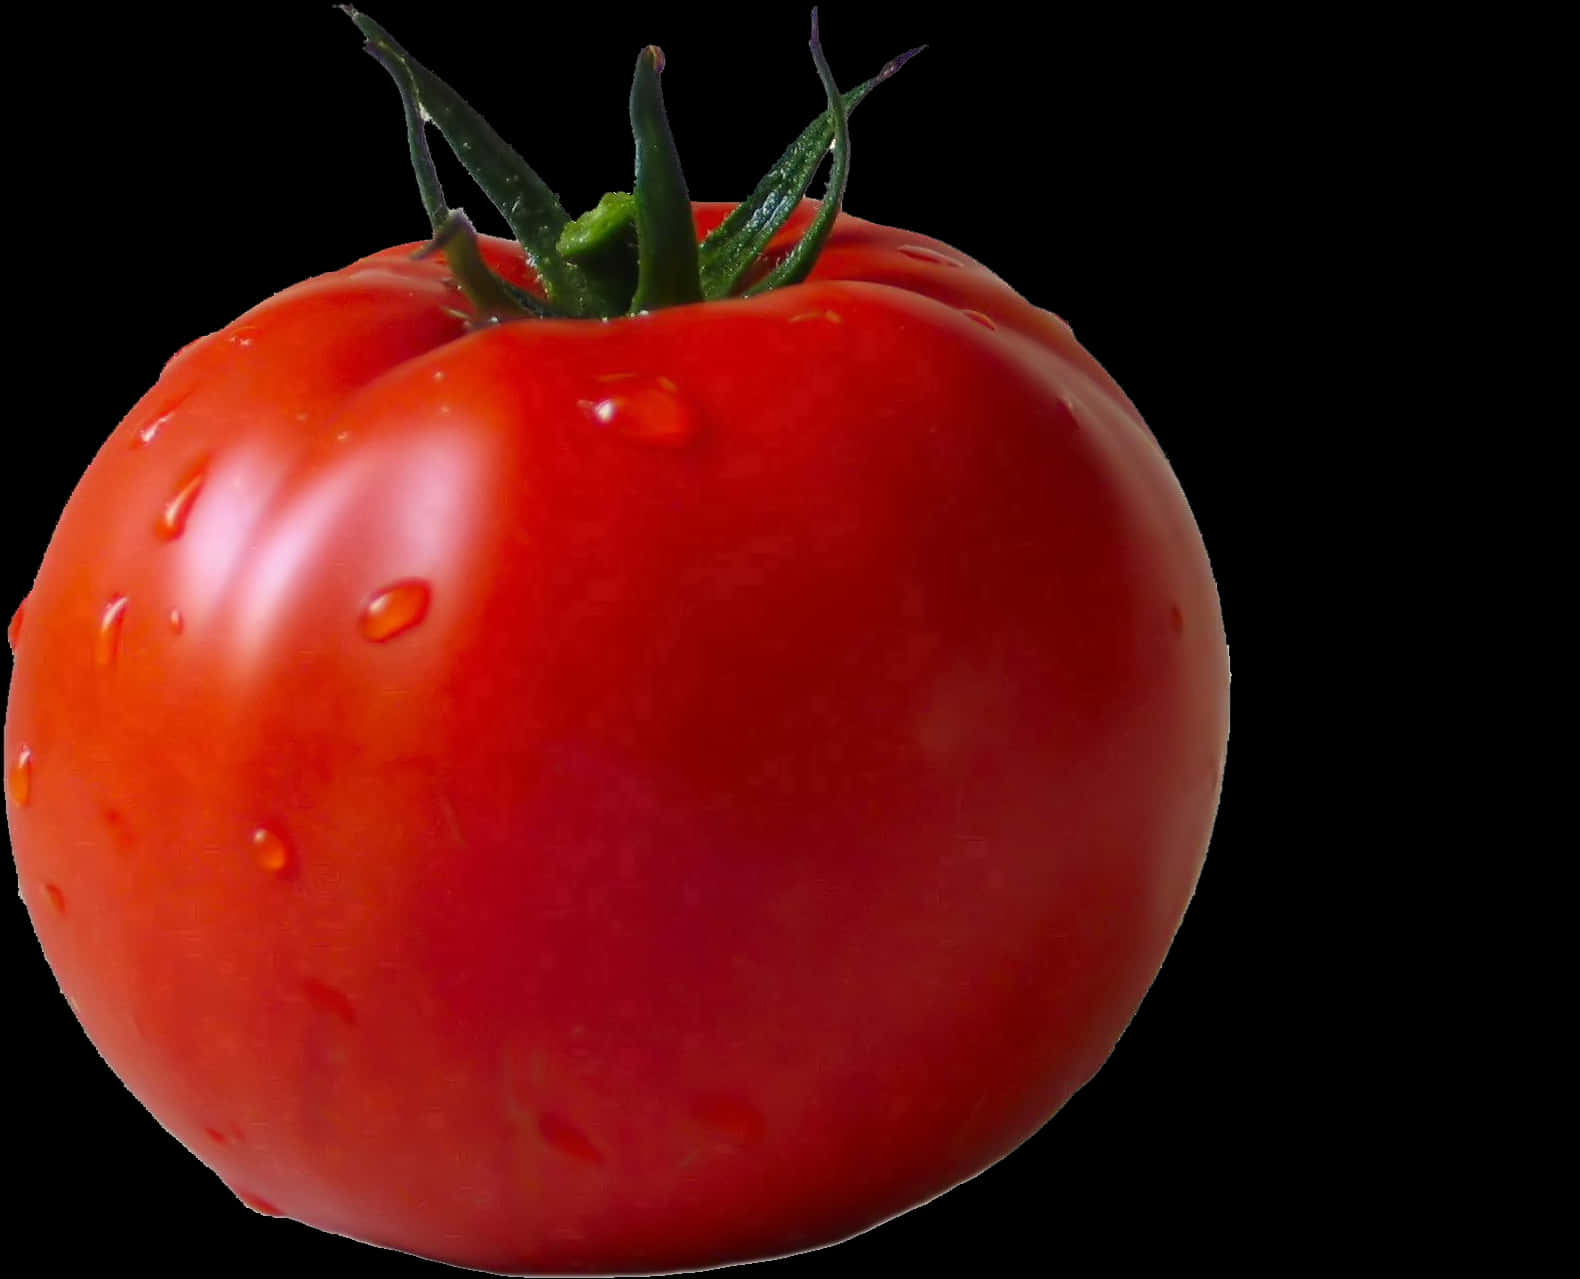 Fresh Red Tomatowith Water Droplets